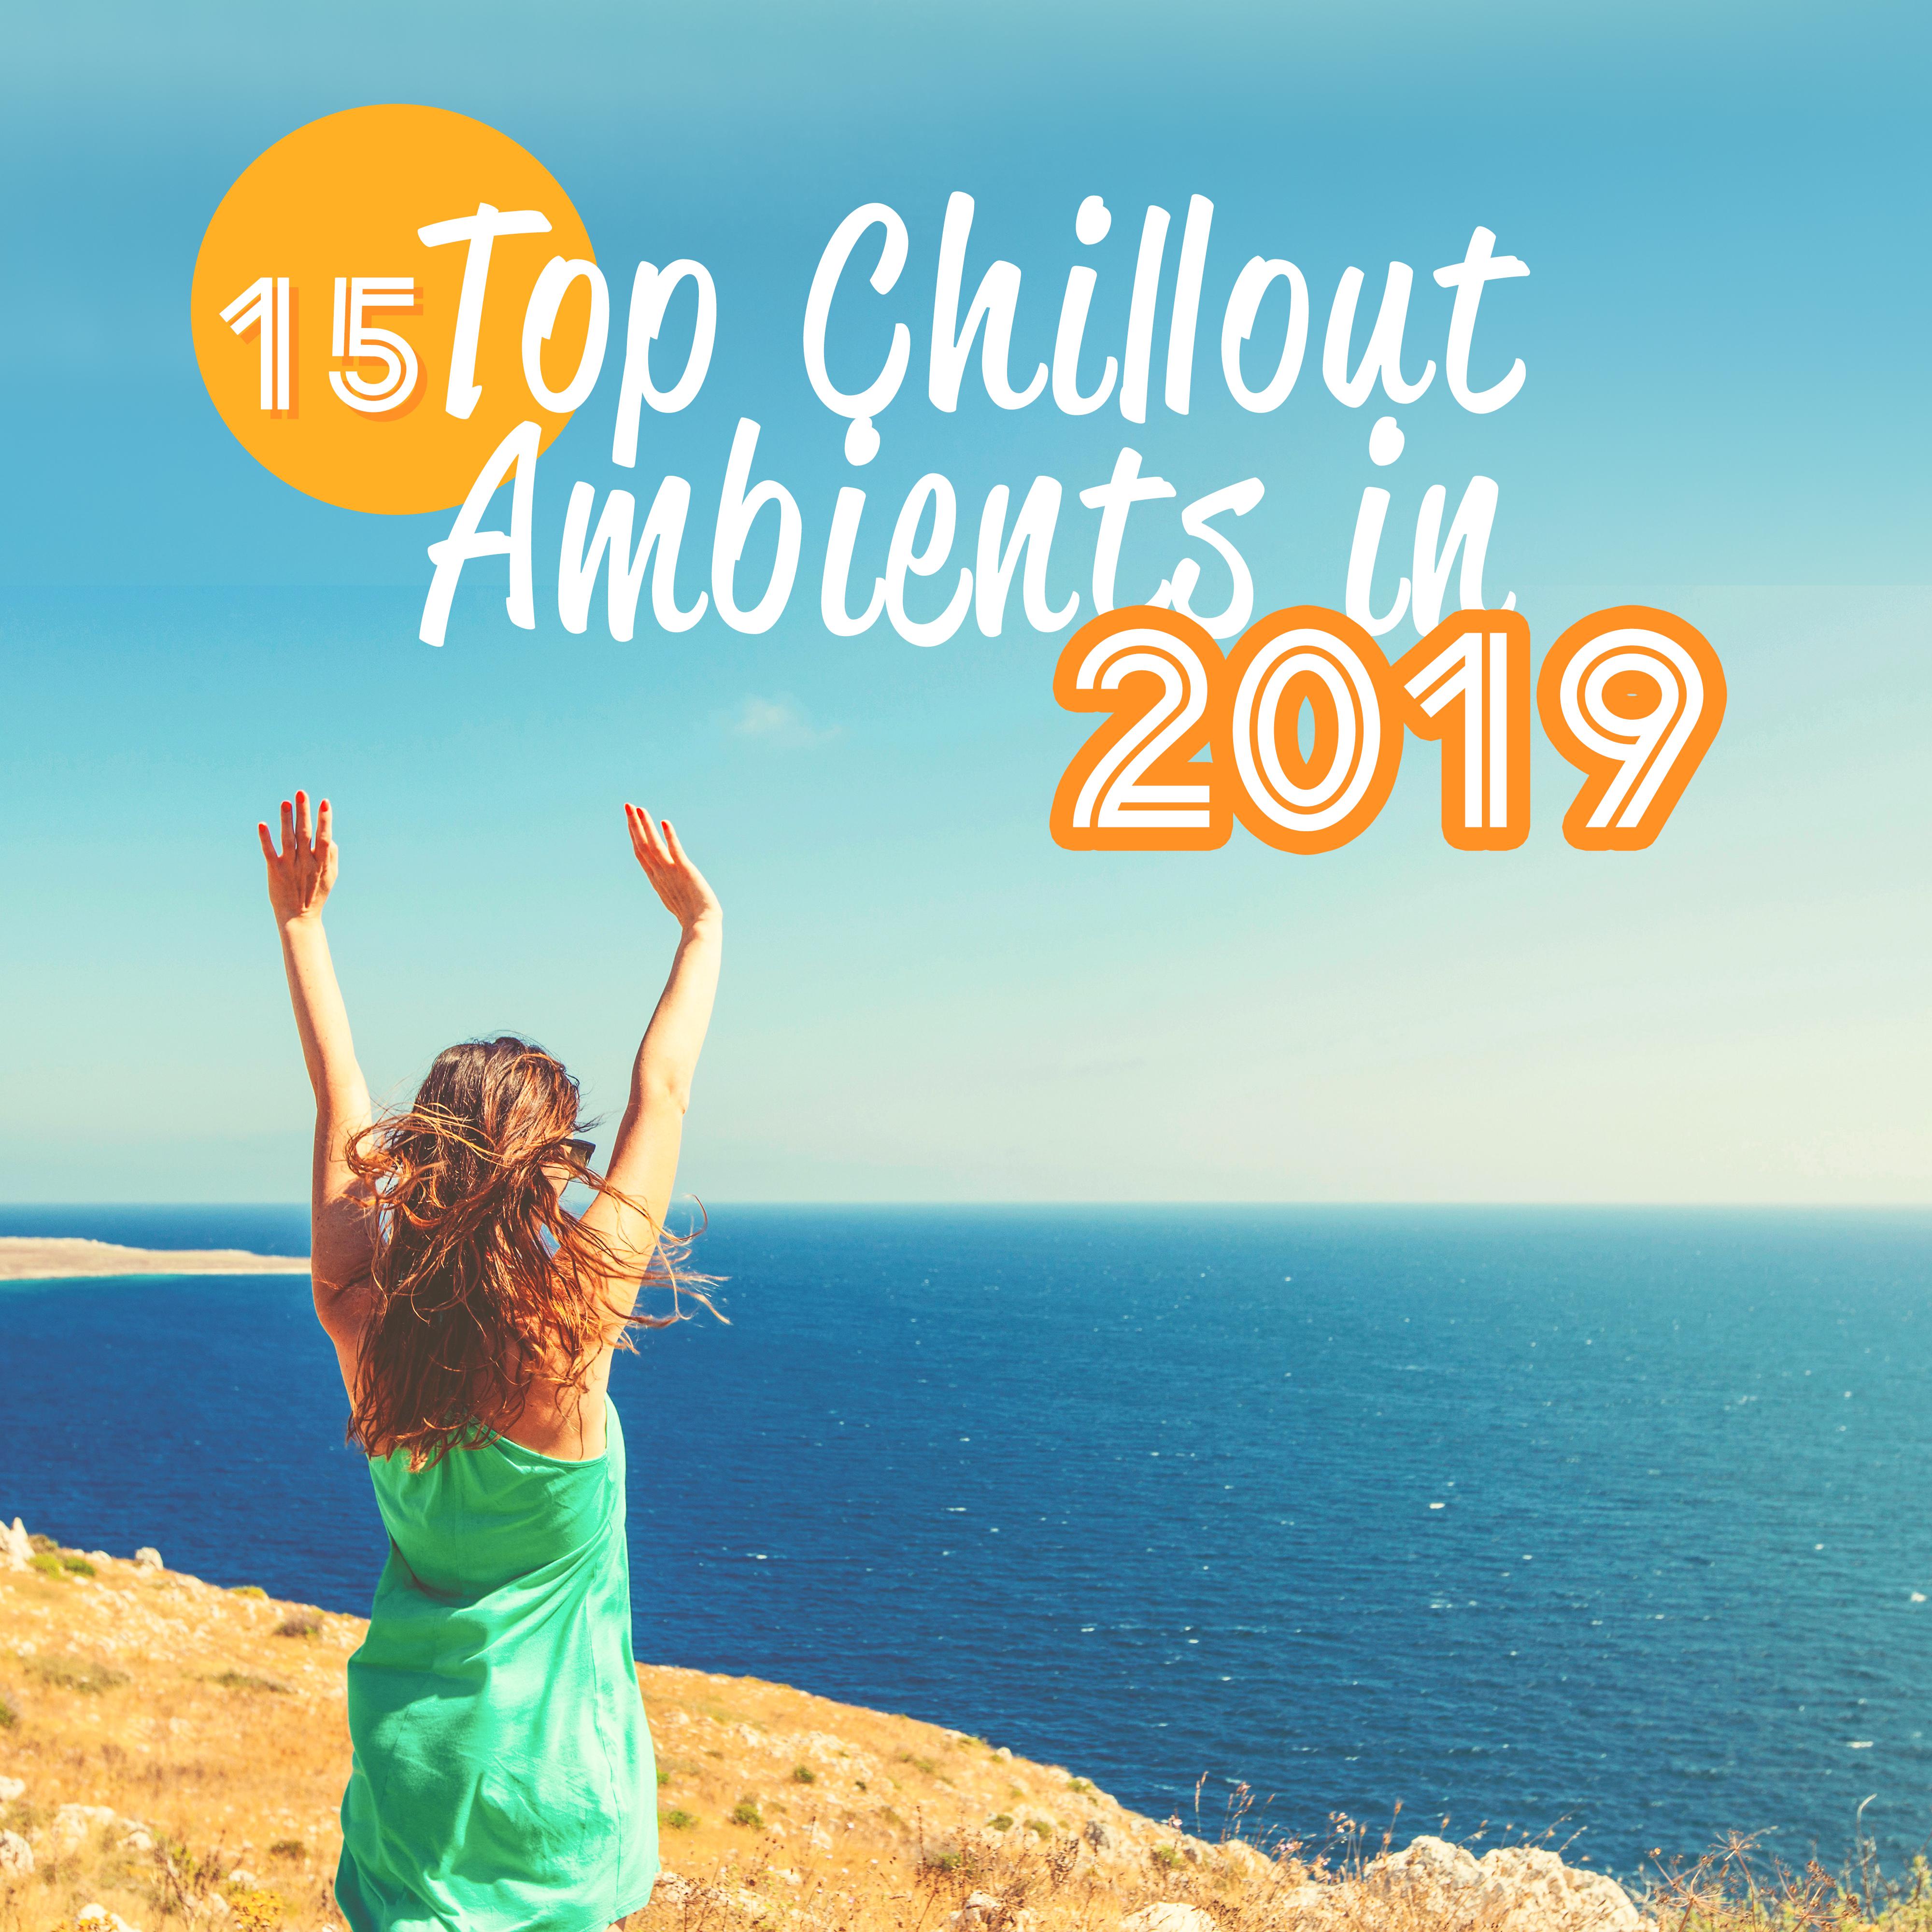 15 Top Chillout Ambients in 2019